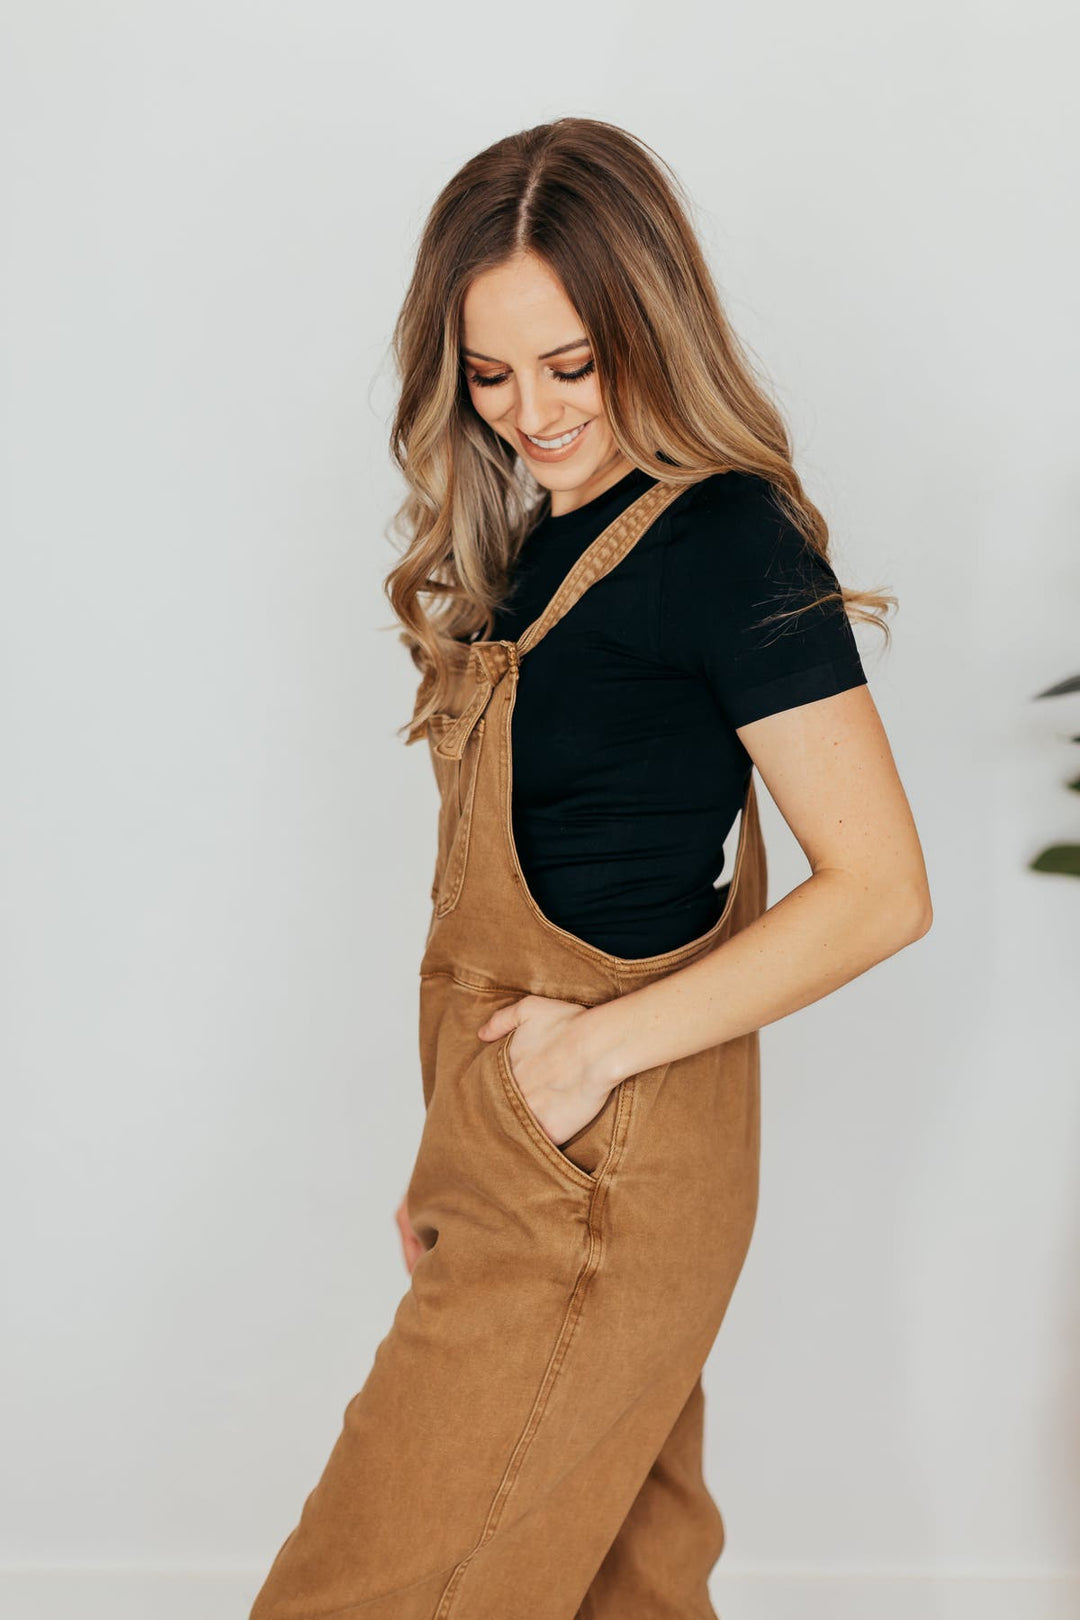 Zen Washed Twill Overalls (Deep Camel)